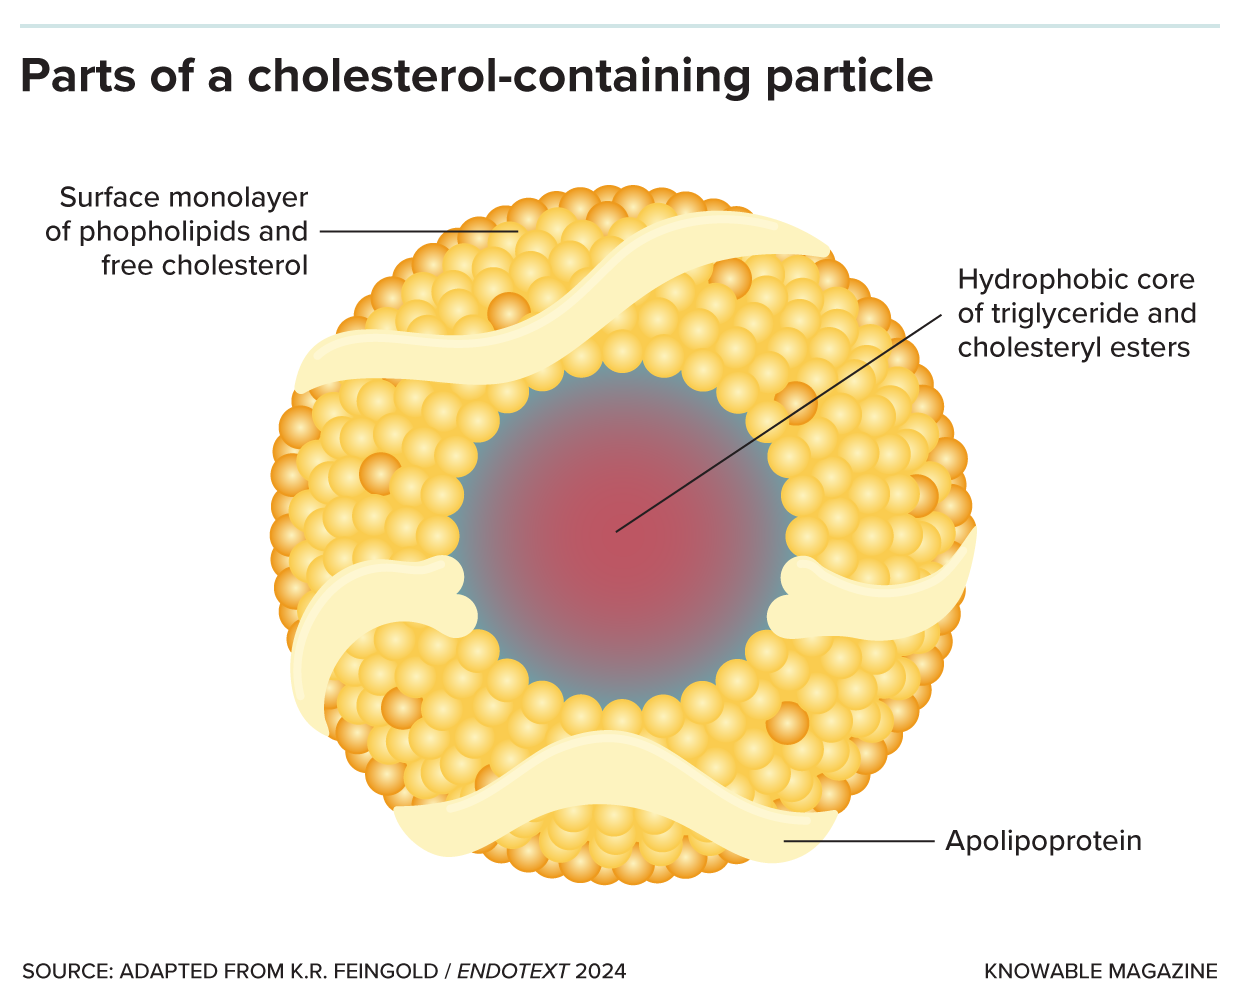 A diagram shows a lipoprotein particle with a core made up of cholesteryl esters and triglycerides, and a surface containing phospholipids, free cholesterol and apolipoprotein.